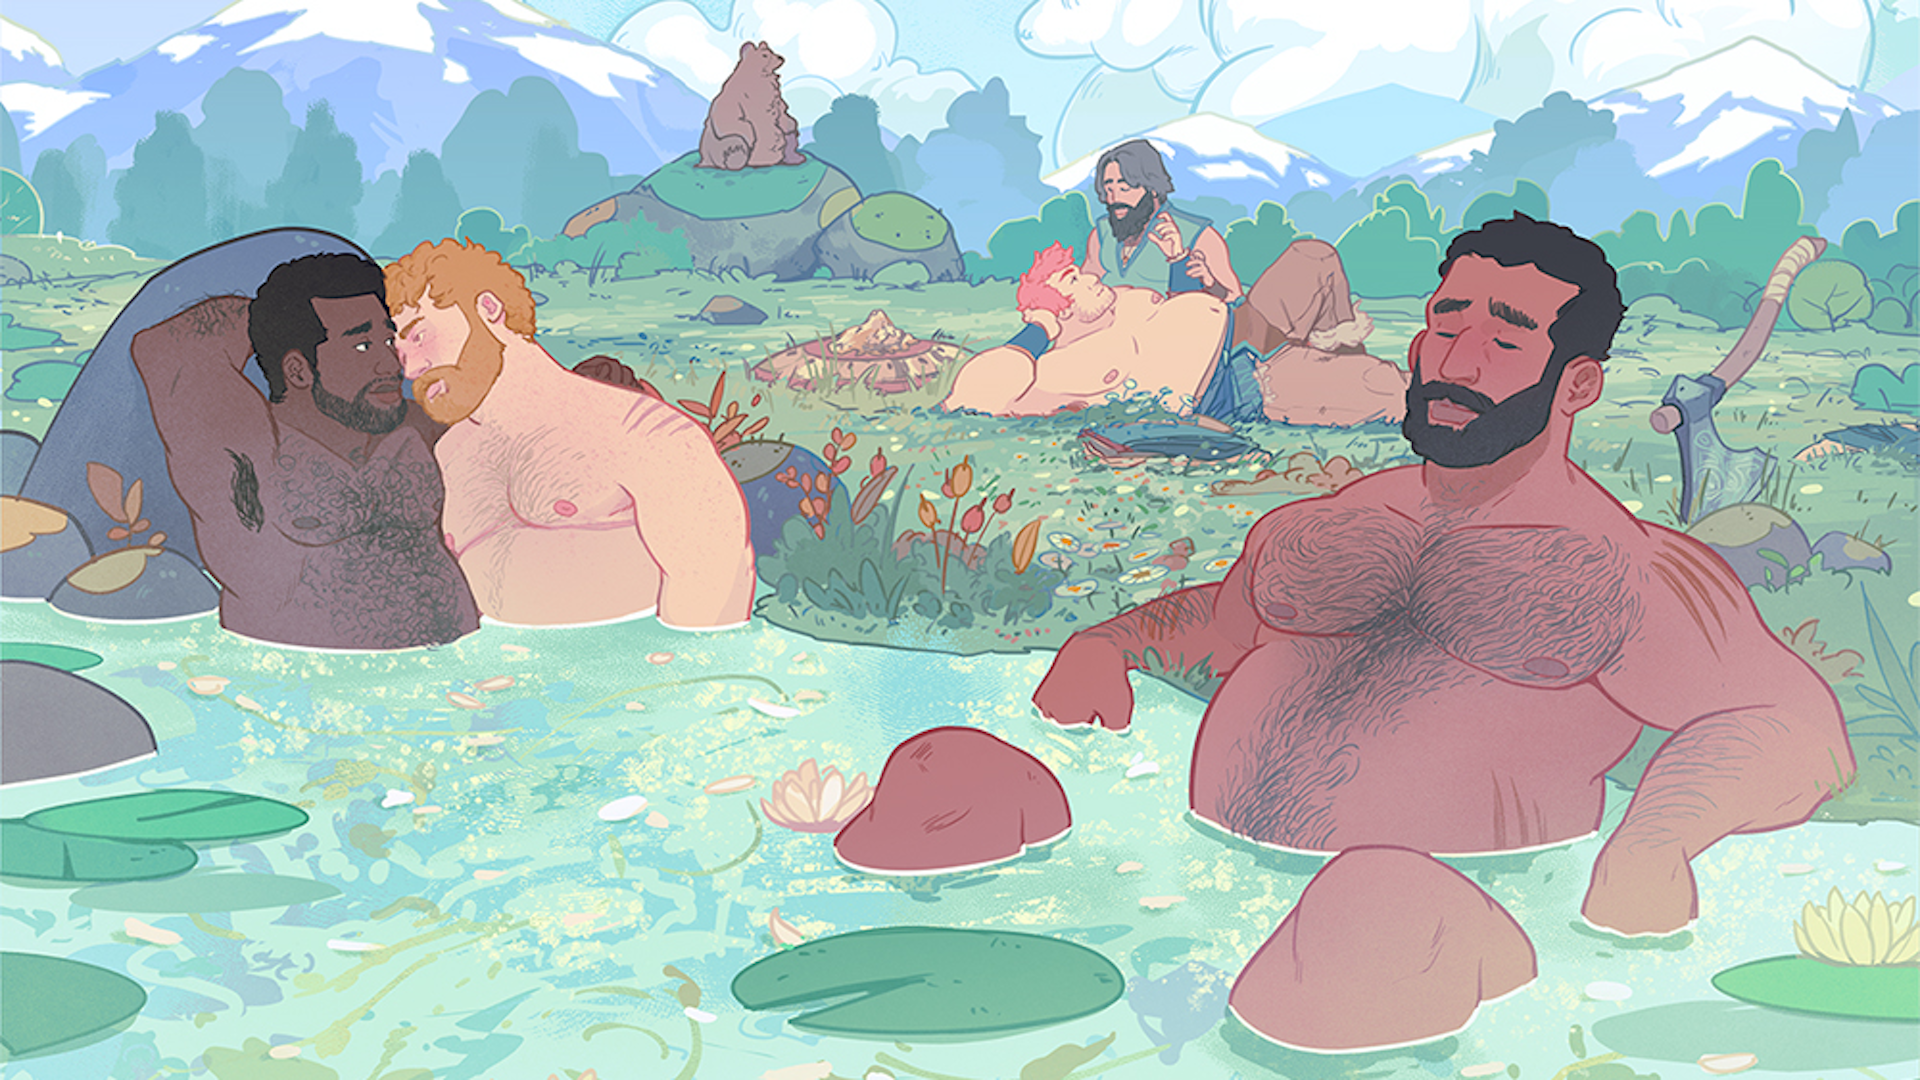 Several large men with beards, along with one actual bear, relax in a mountain valley pool.